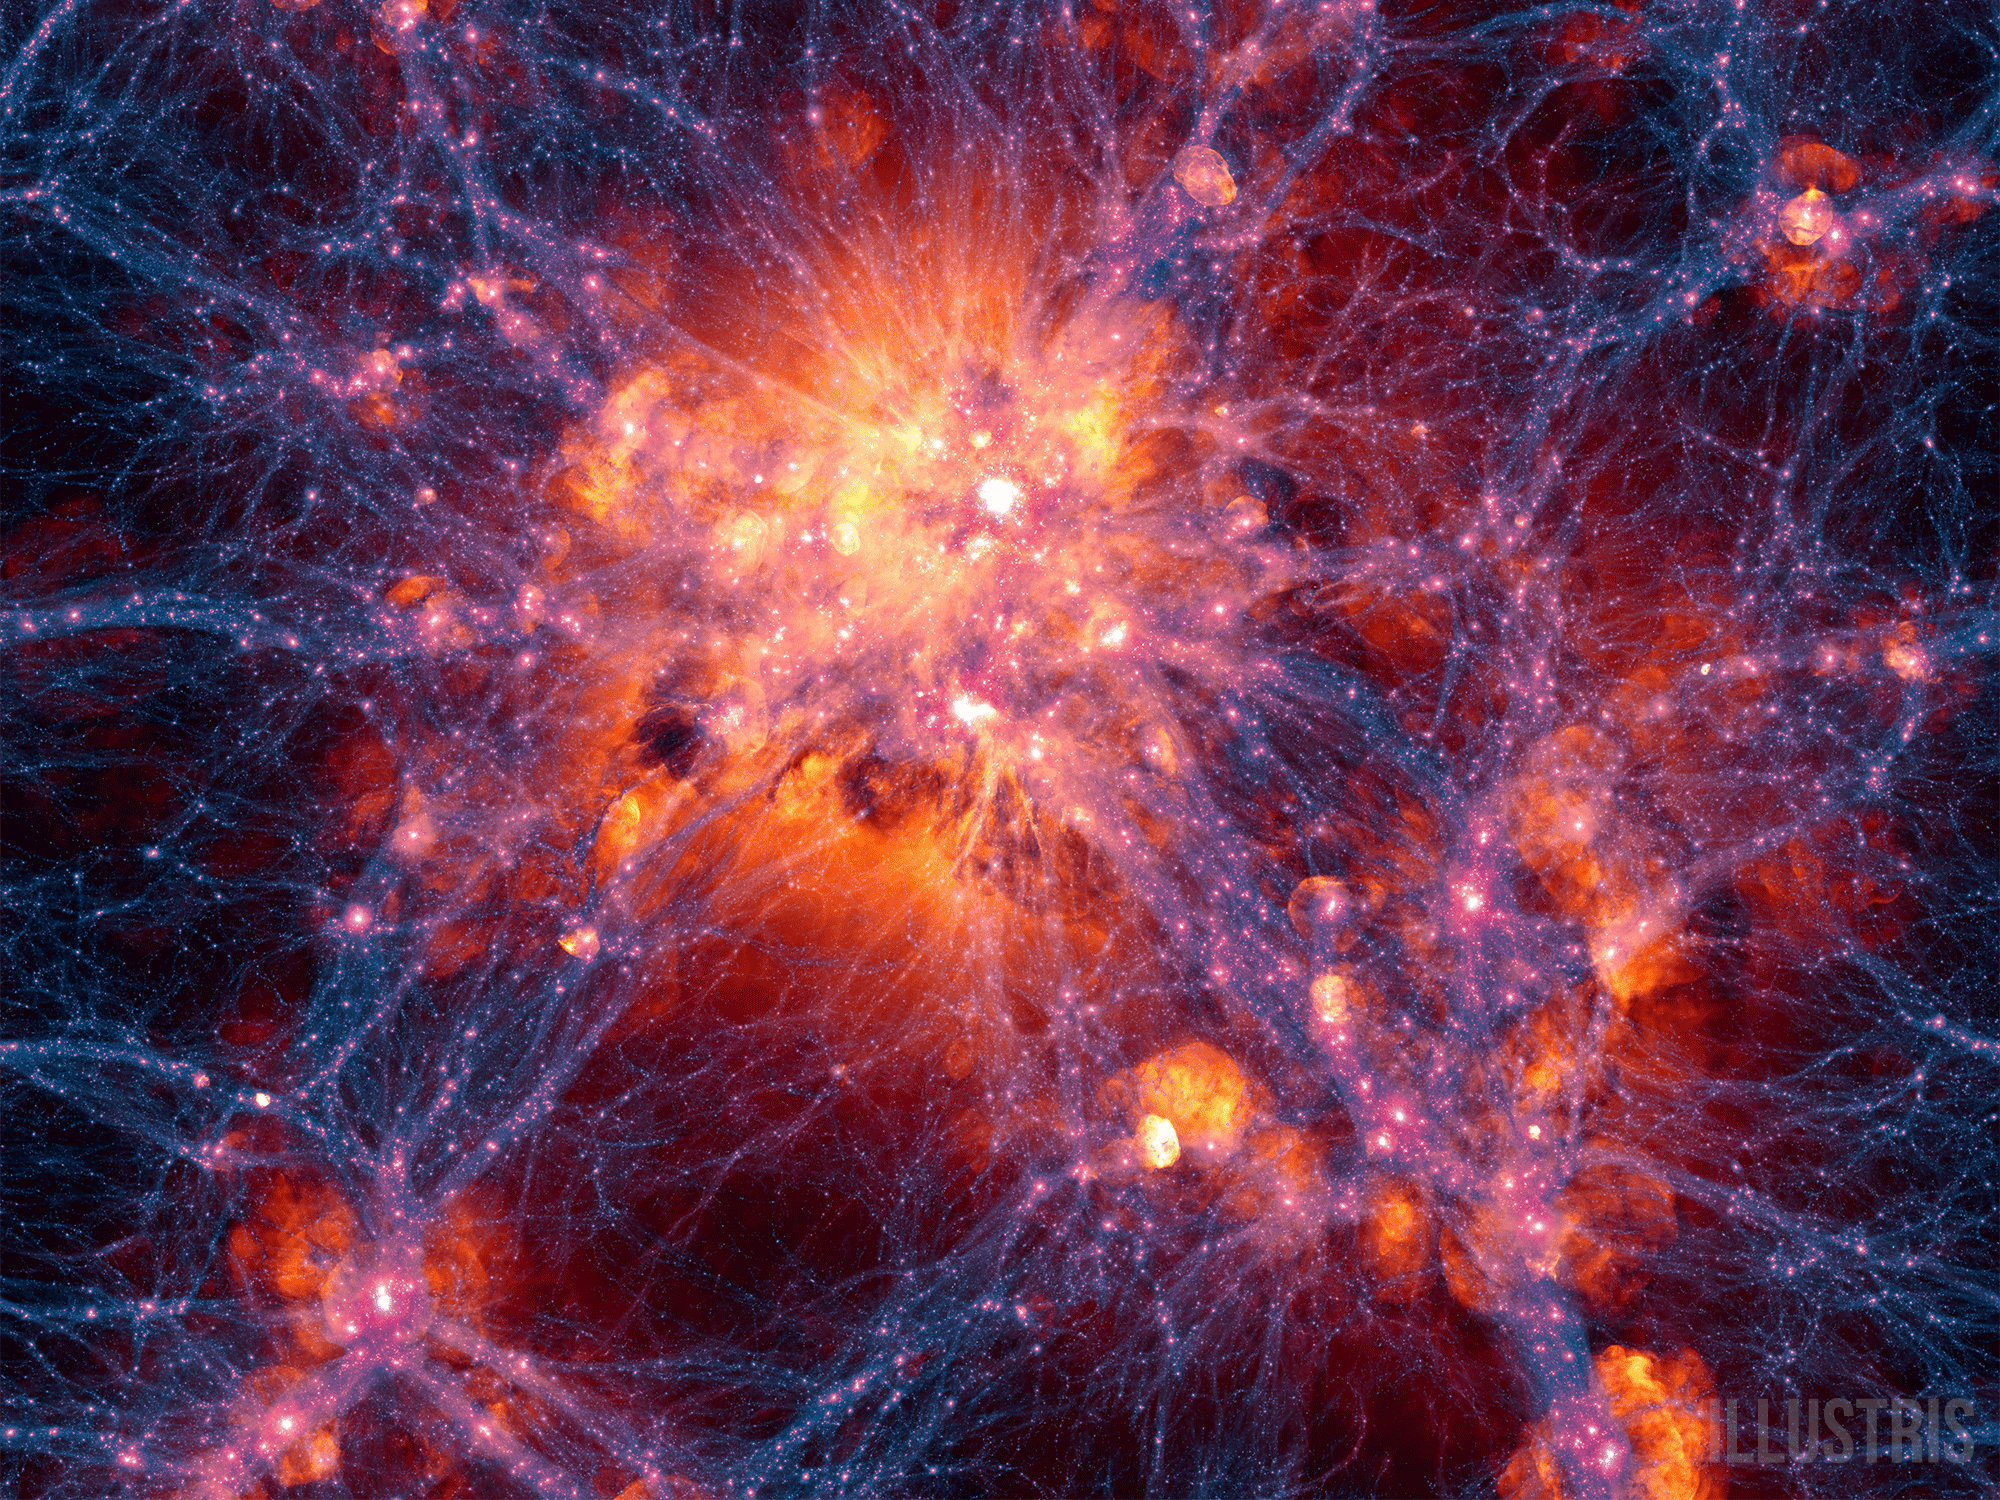 Image - A visualization of a massive galaxy cluster that shows dark matter density (purple filaments) overlaid with the gas velocity field. (Credit: Illustris Collaboration)